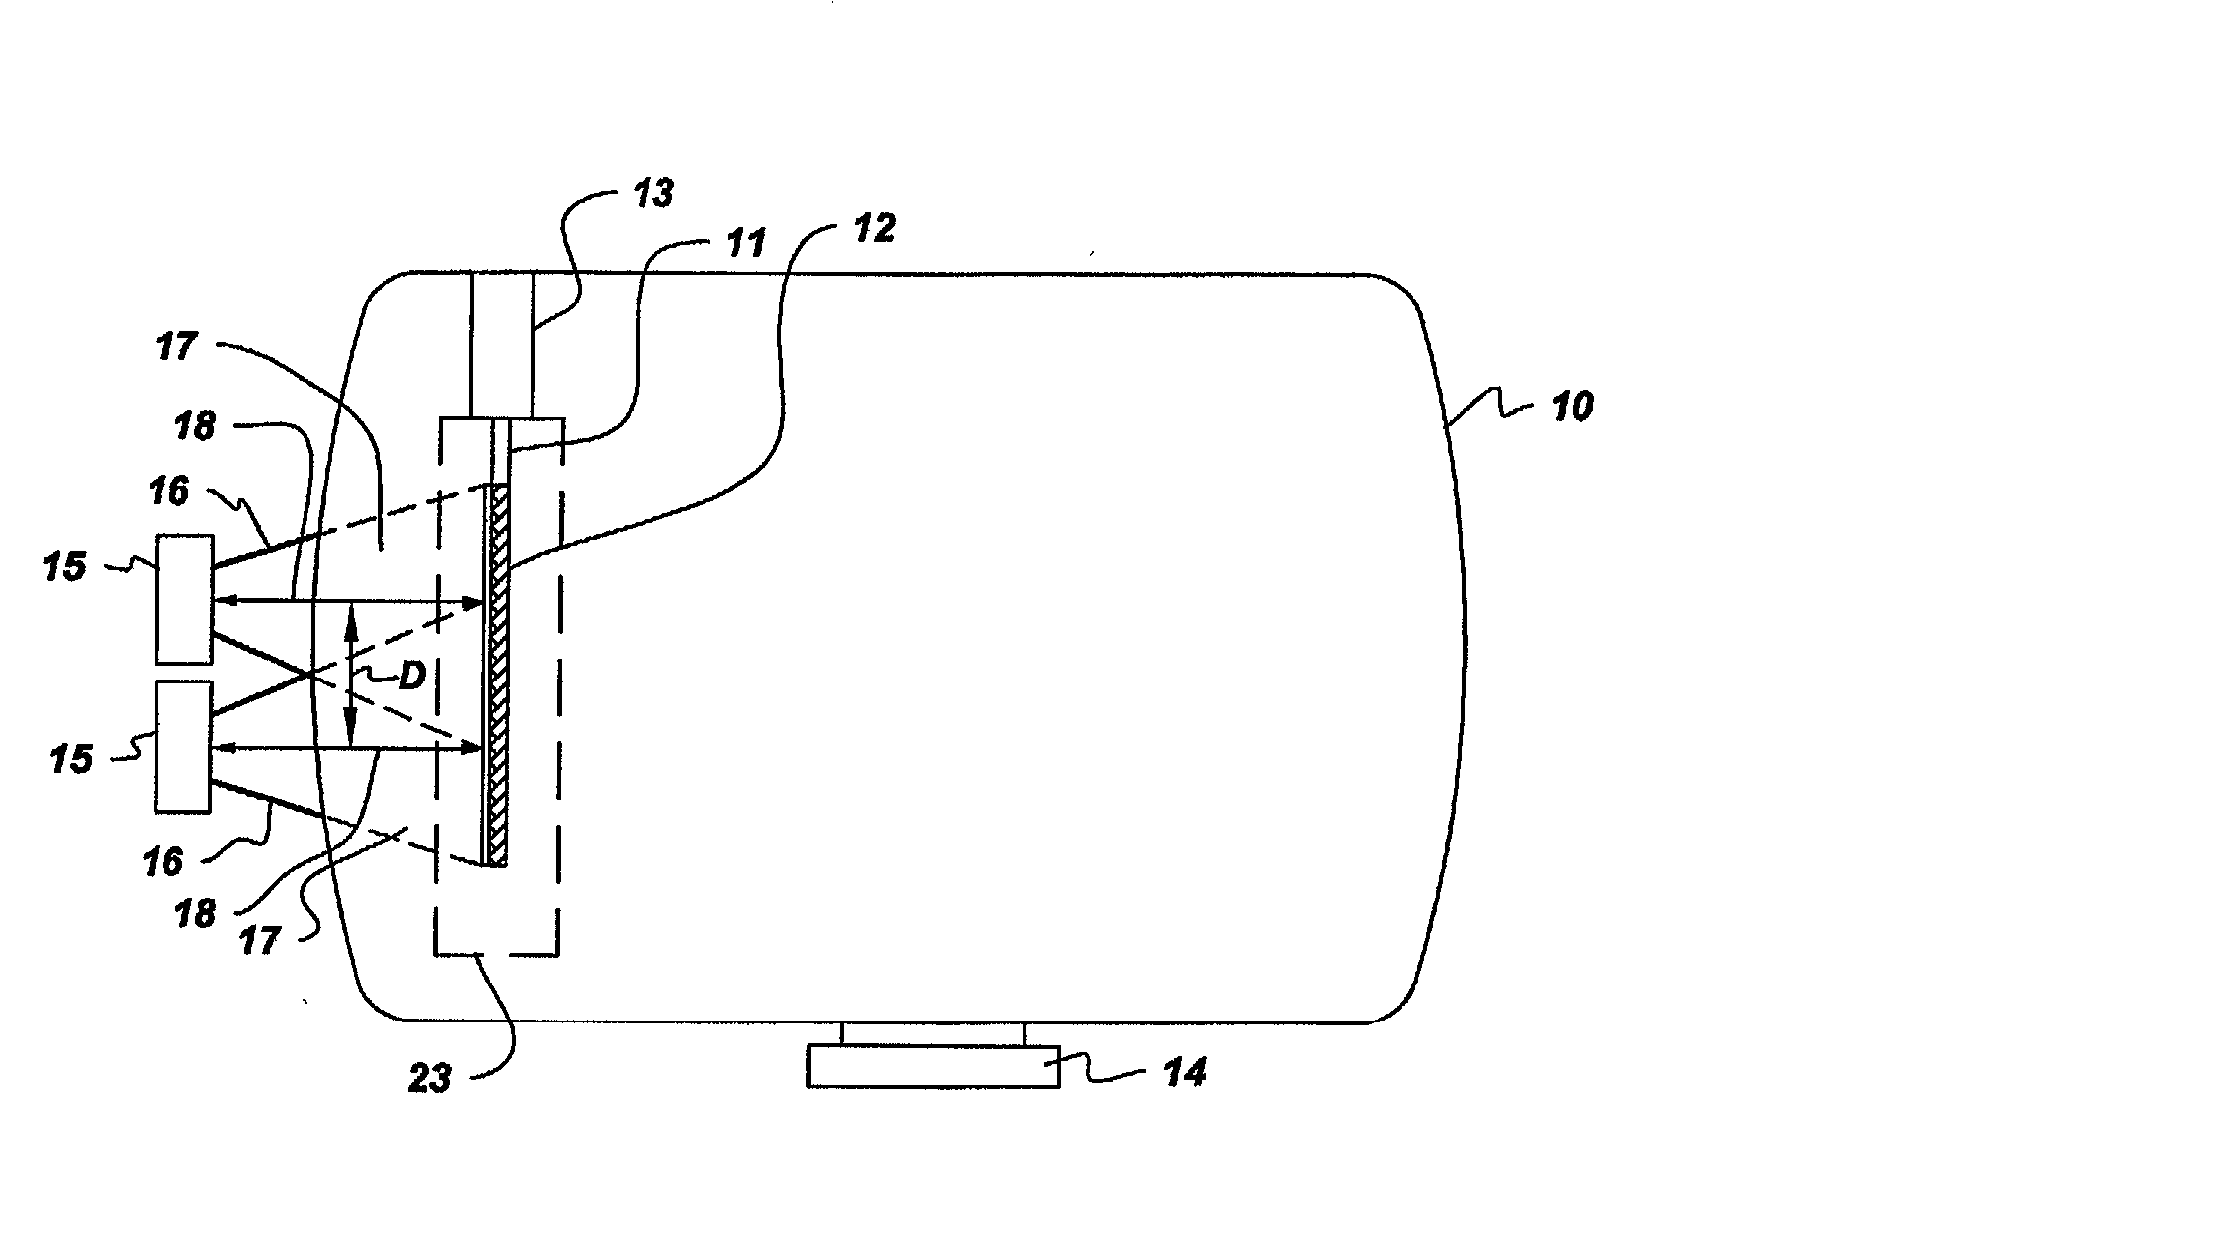 Apparatus and method for large area chemical vapor deposition using multiple expanding thermal plasma generators